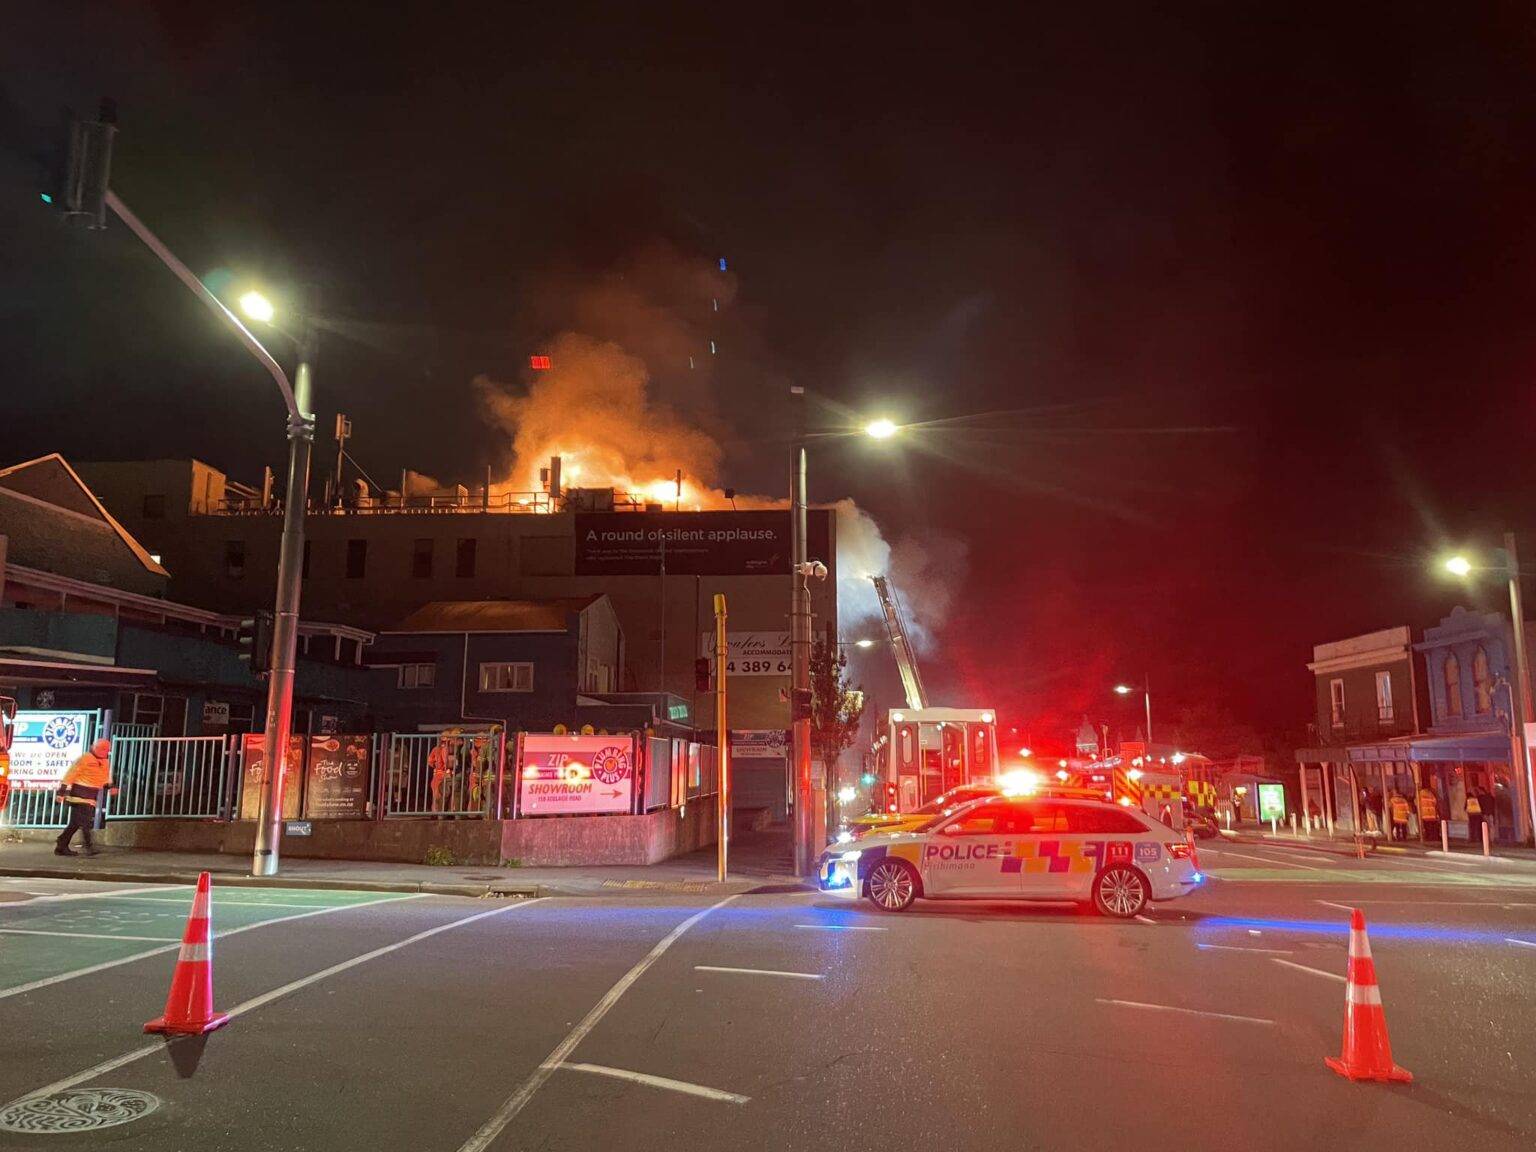 At least six killed in fire at hostel in New Zealand